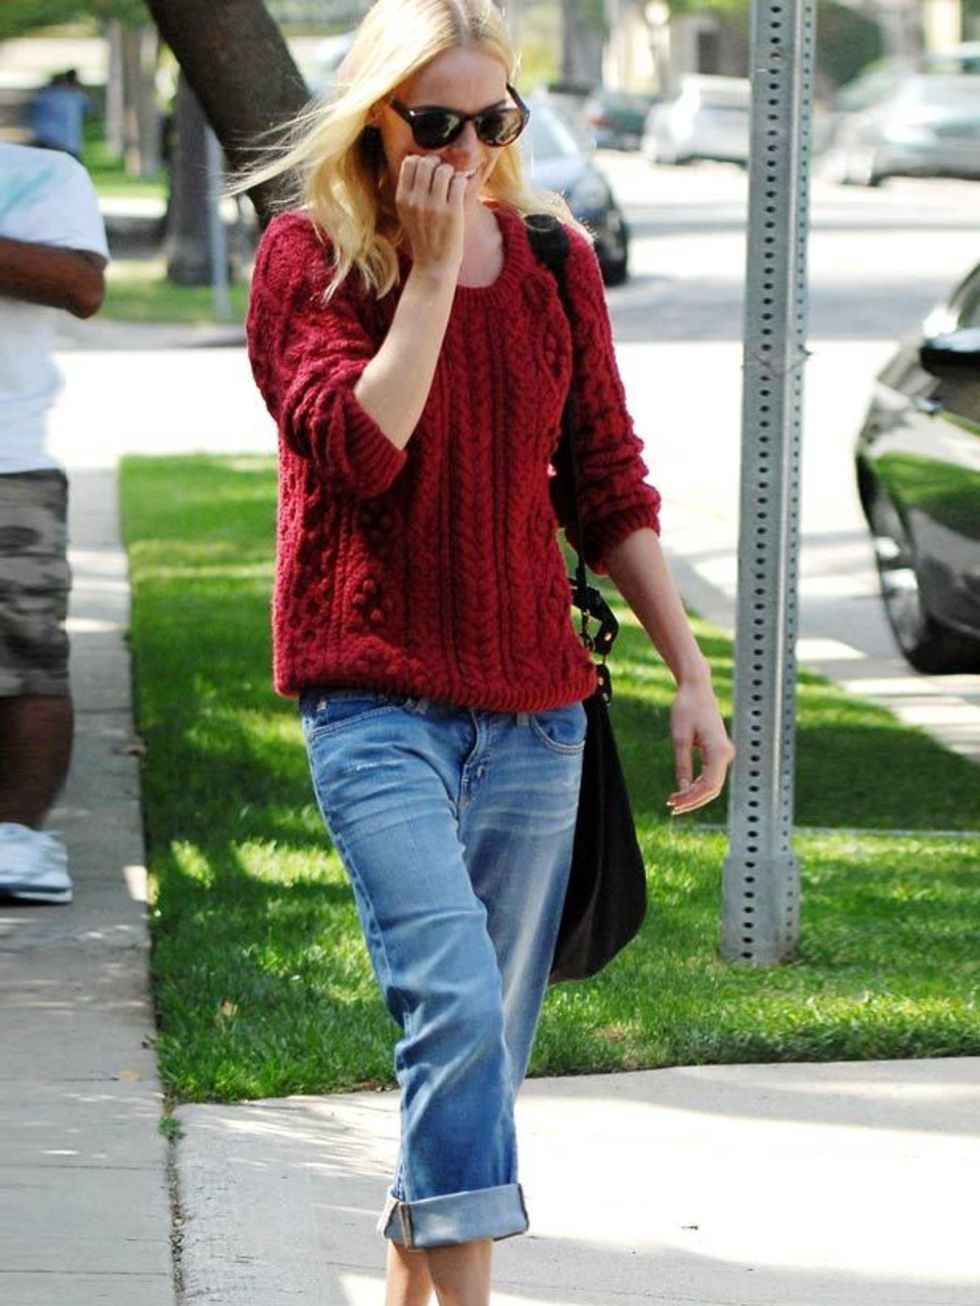 <p><a href="http://www.elleuk.com/starstyle/style-files/(section)/kate-bosworth">Kate Bosworth</a> works an off-duty LA look in a cable knit sweater and boyfriend jeans</p>